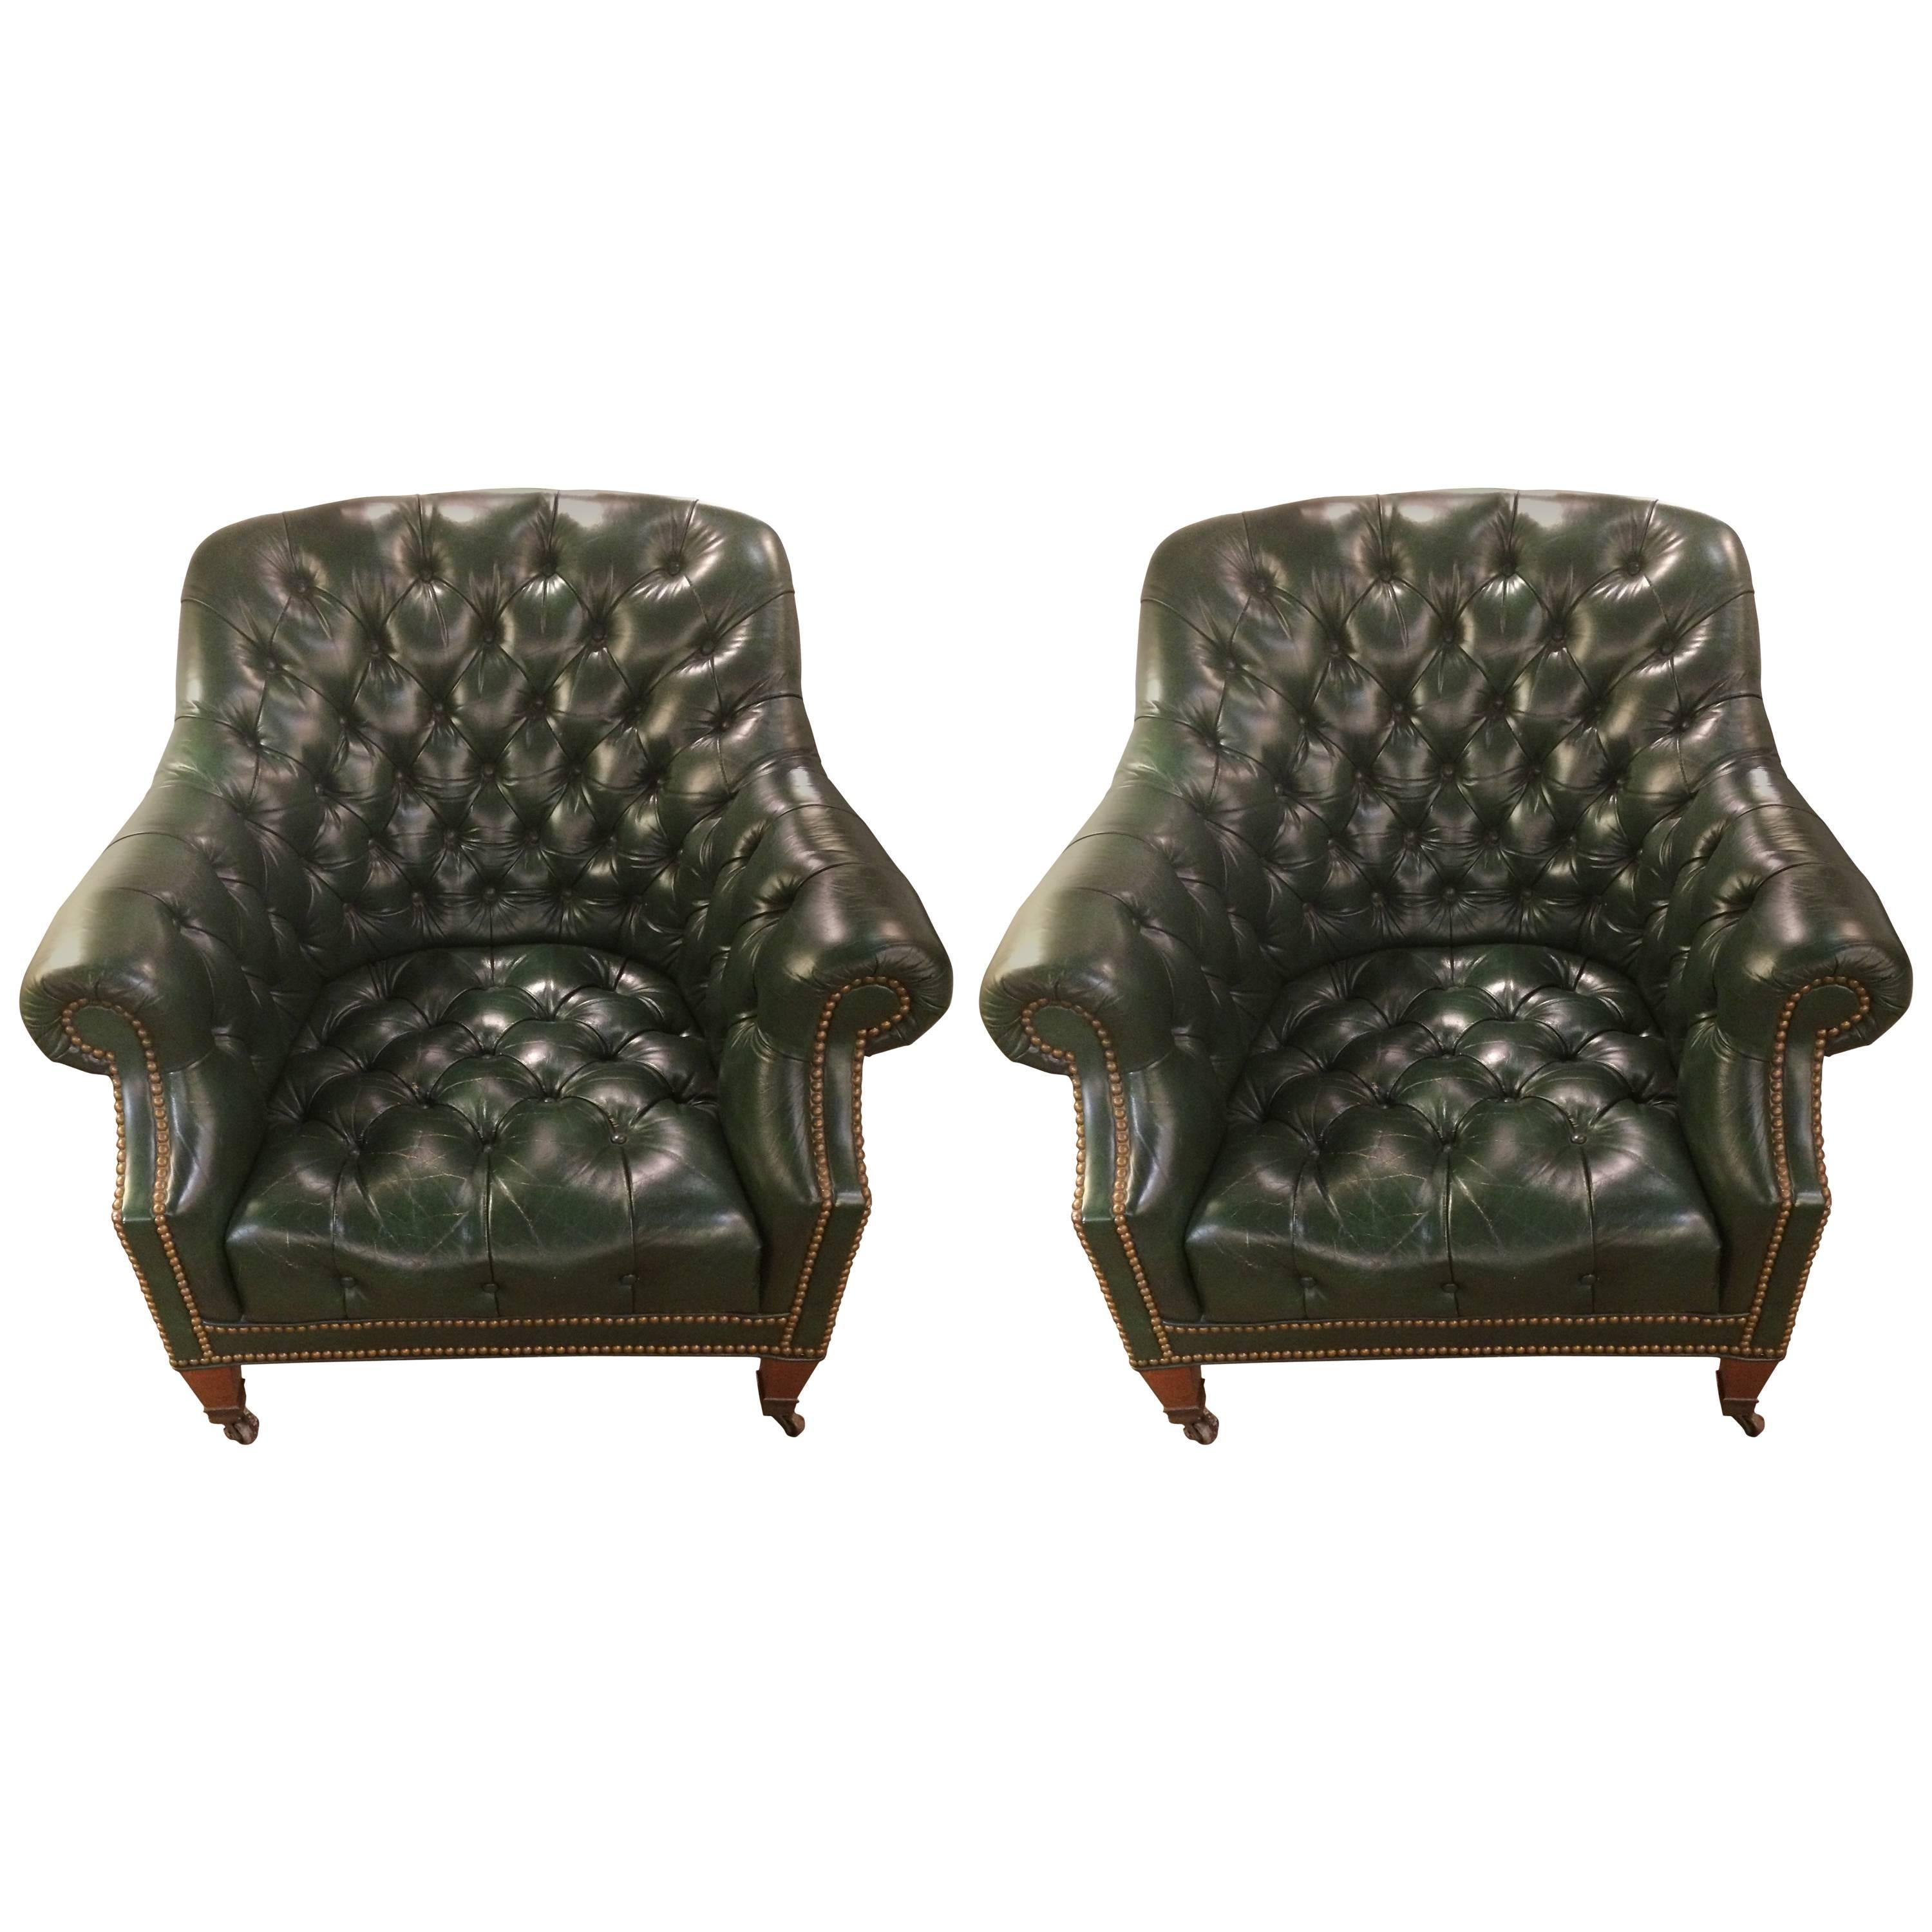 Yummy Pair of Dark Green Leather Tufted Club Chairs